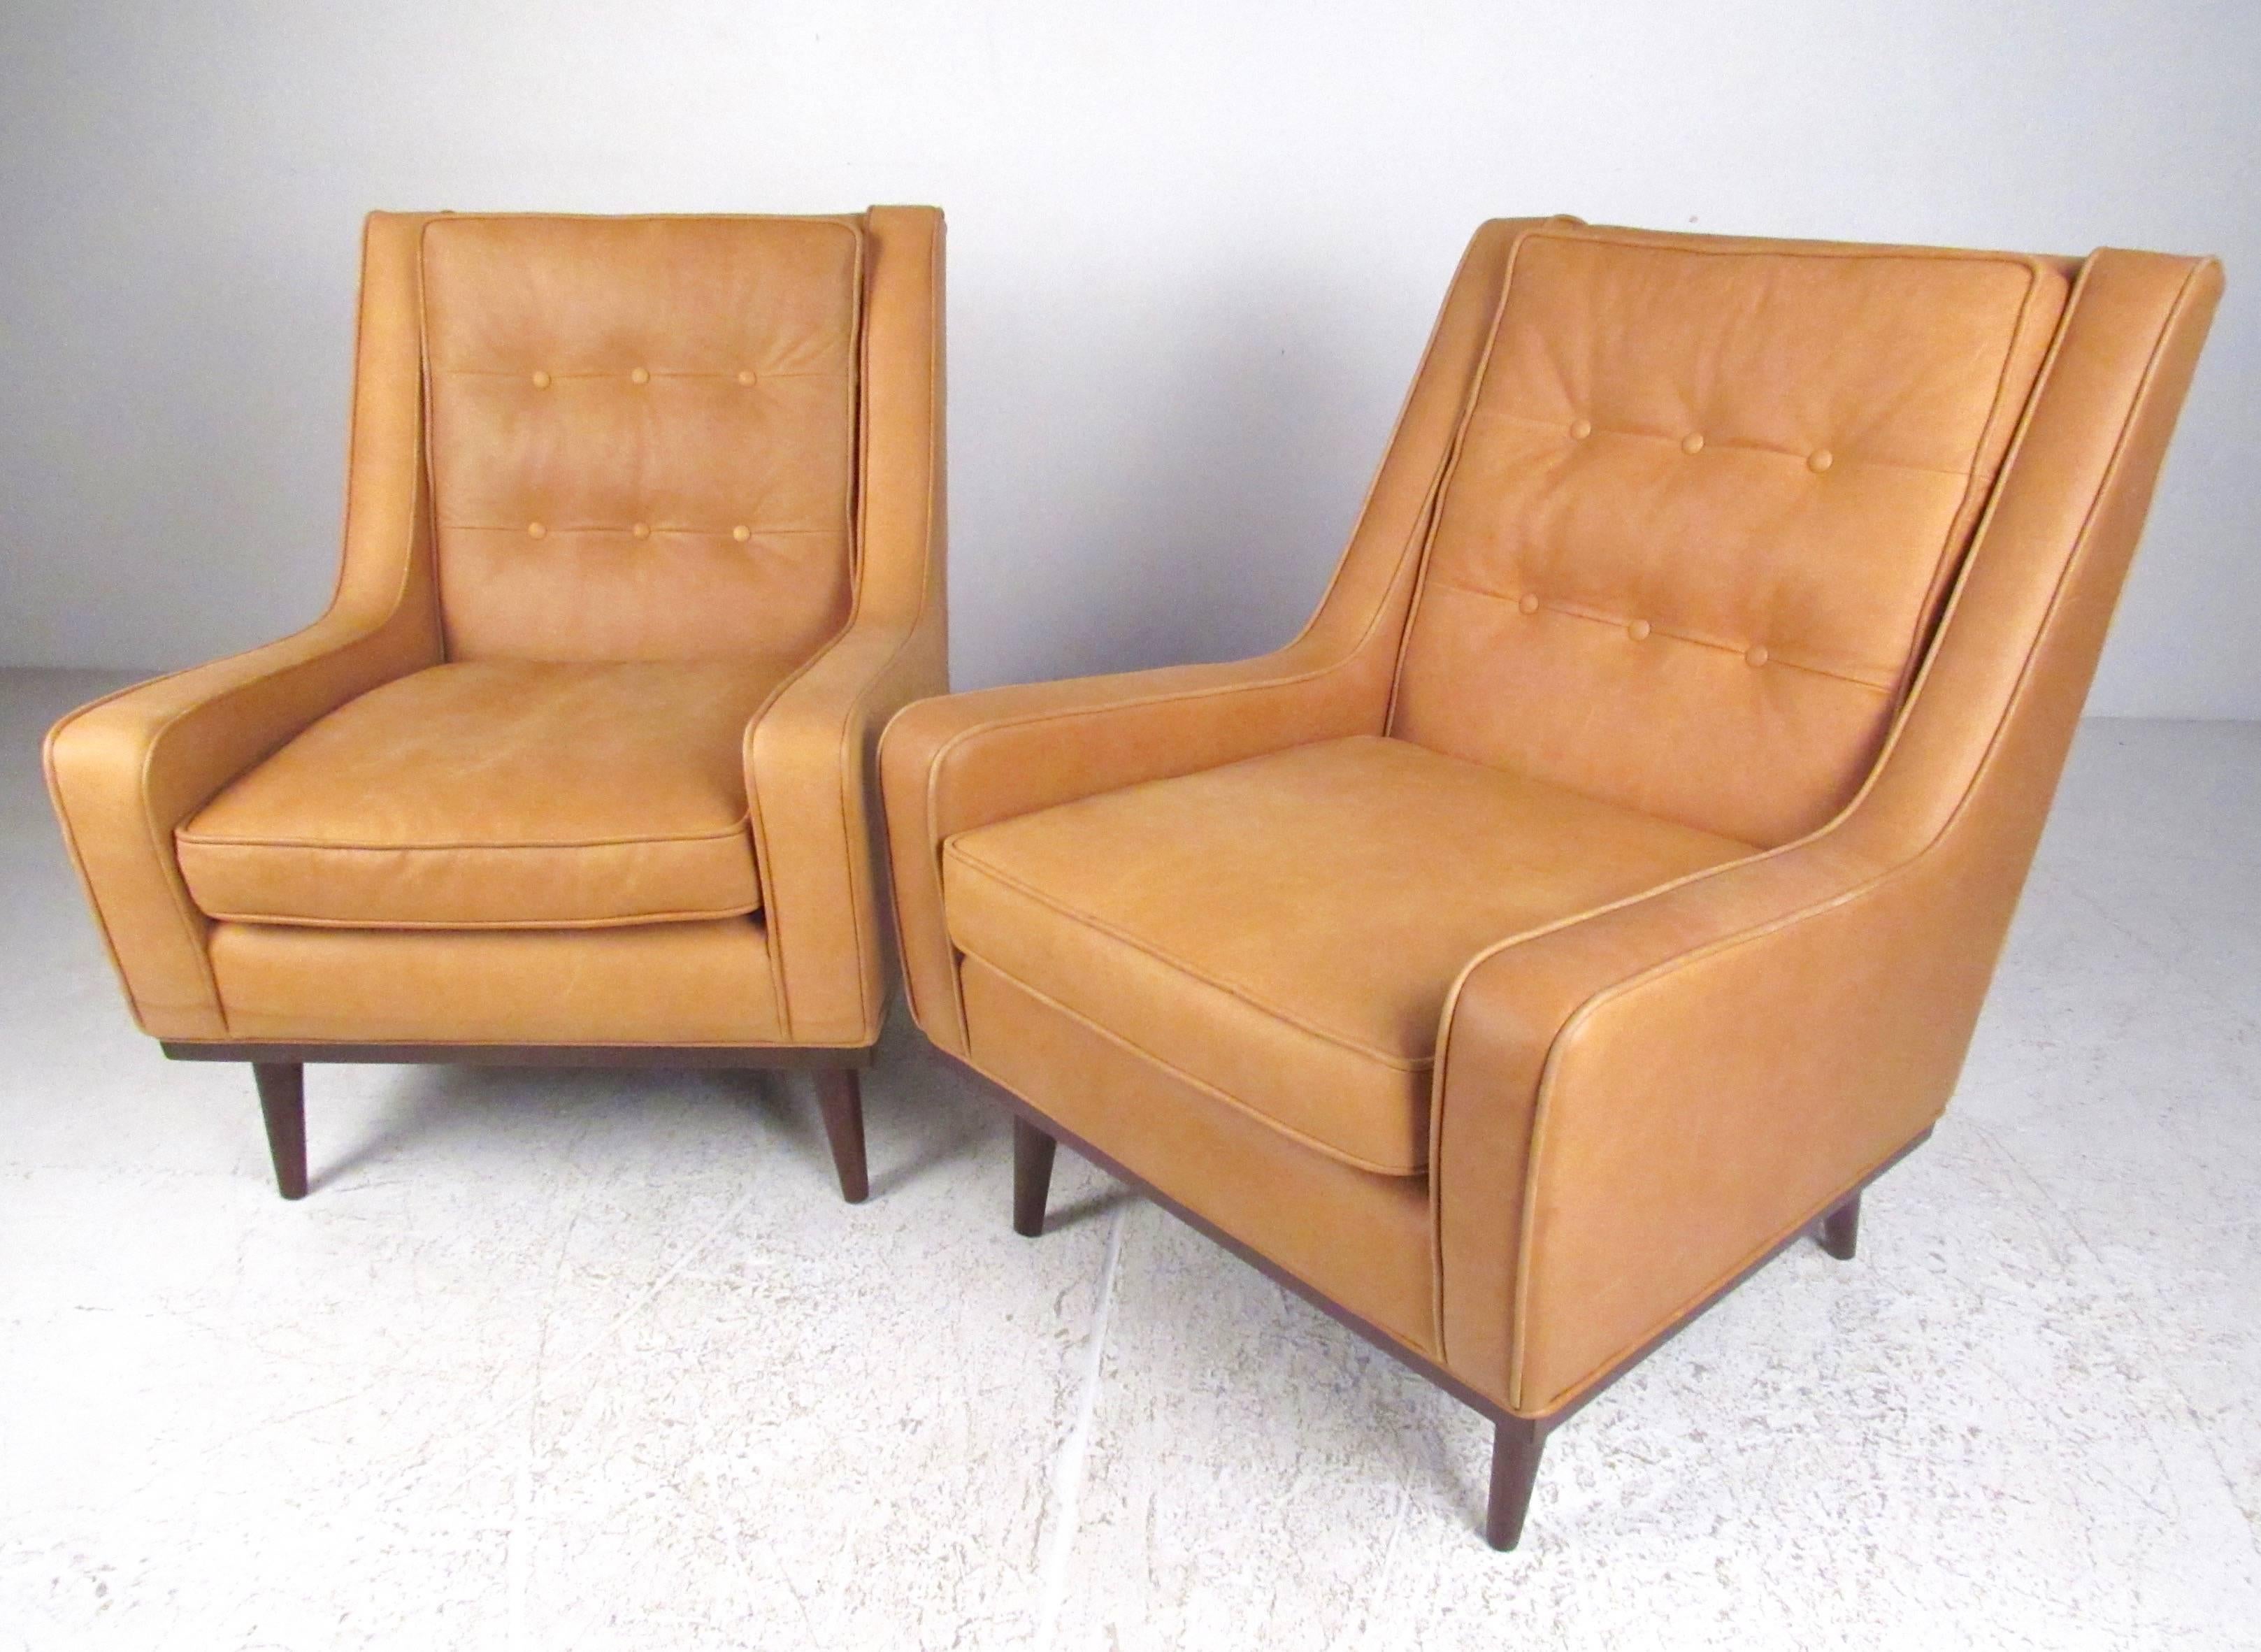 This beautiful pair of stylish leather club chair feature modern tapered legs, sleek low profile armrests, and spacious comfortable seats. Please confirm item location (NY or NJ).